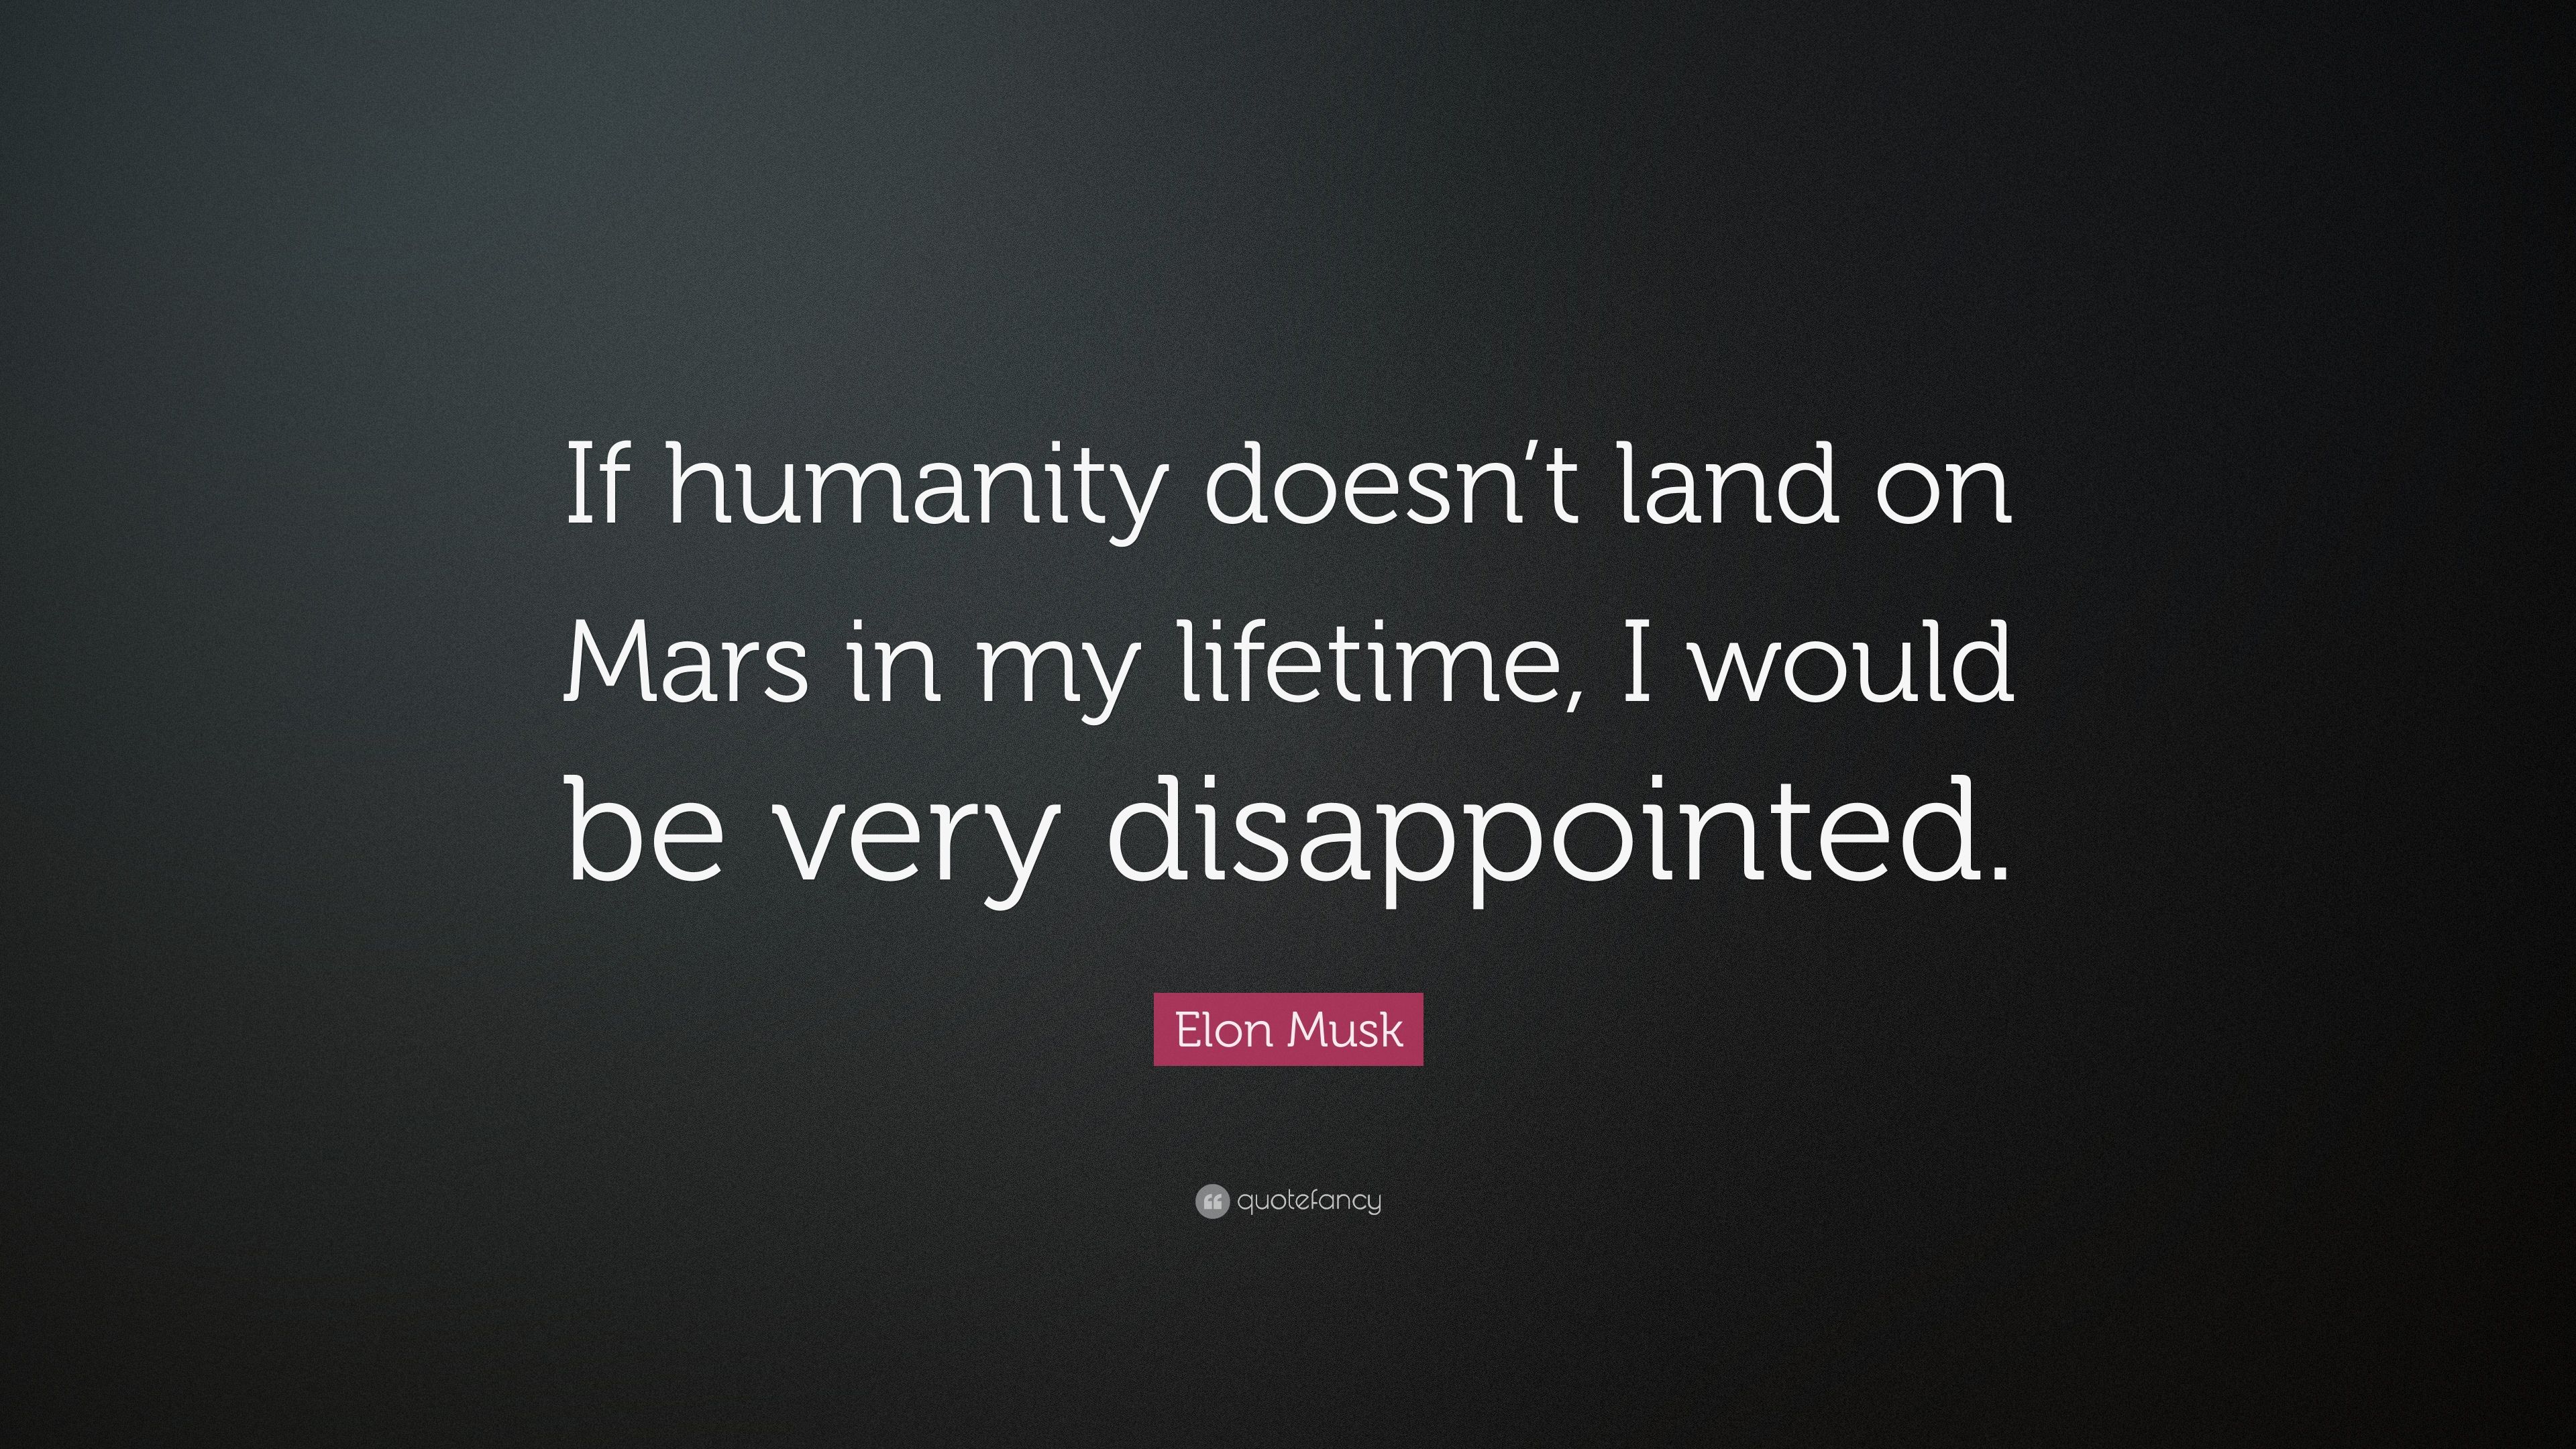 Elon Musk Quote: “If humanity doesn't land on Mars in my lifetime